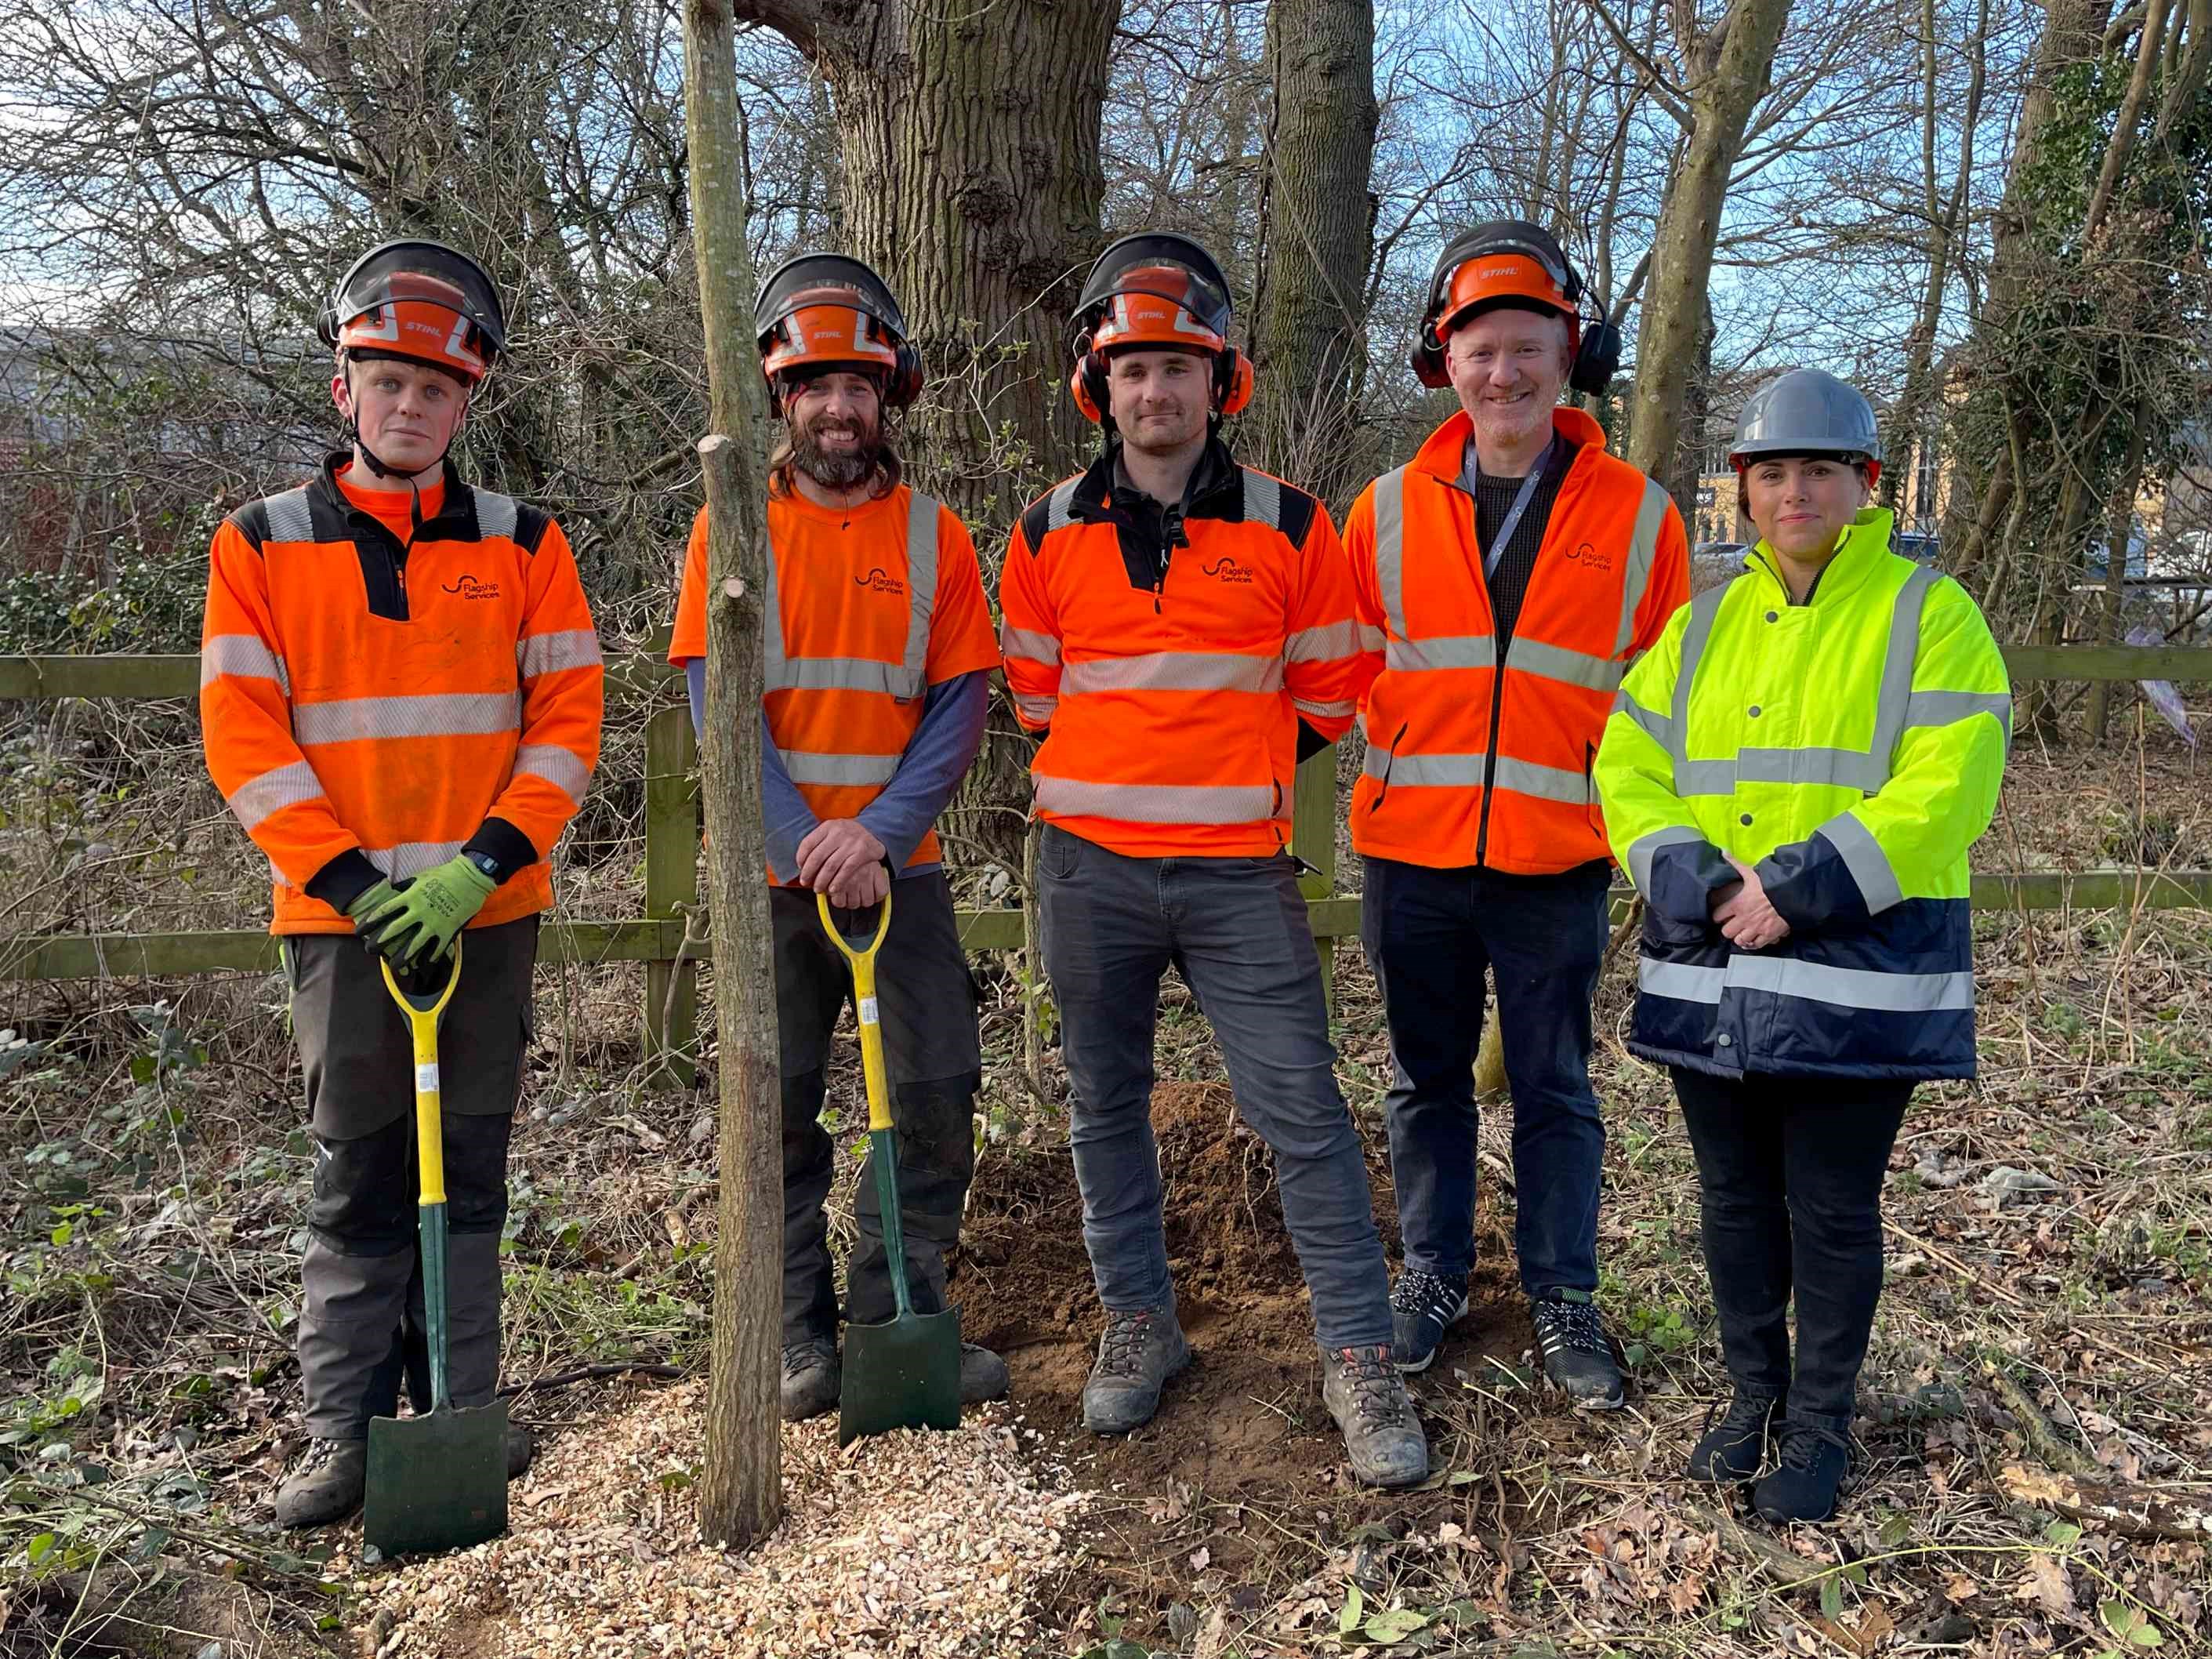 Flagship Group staff at the site of the tree transfer in Bury St Edmunds